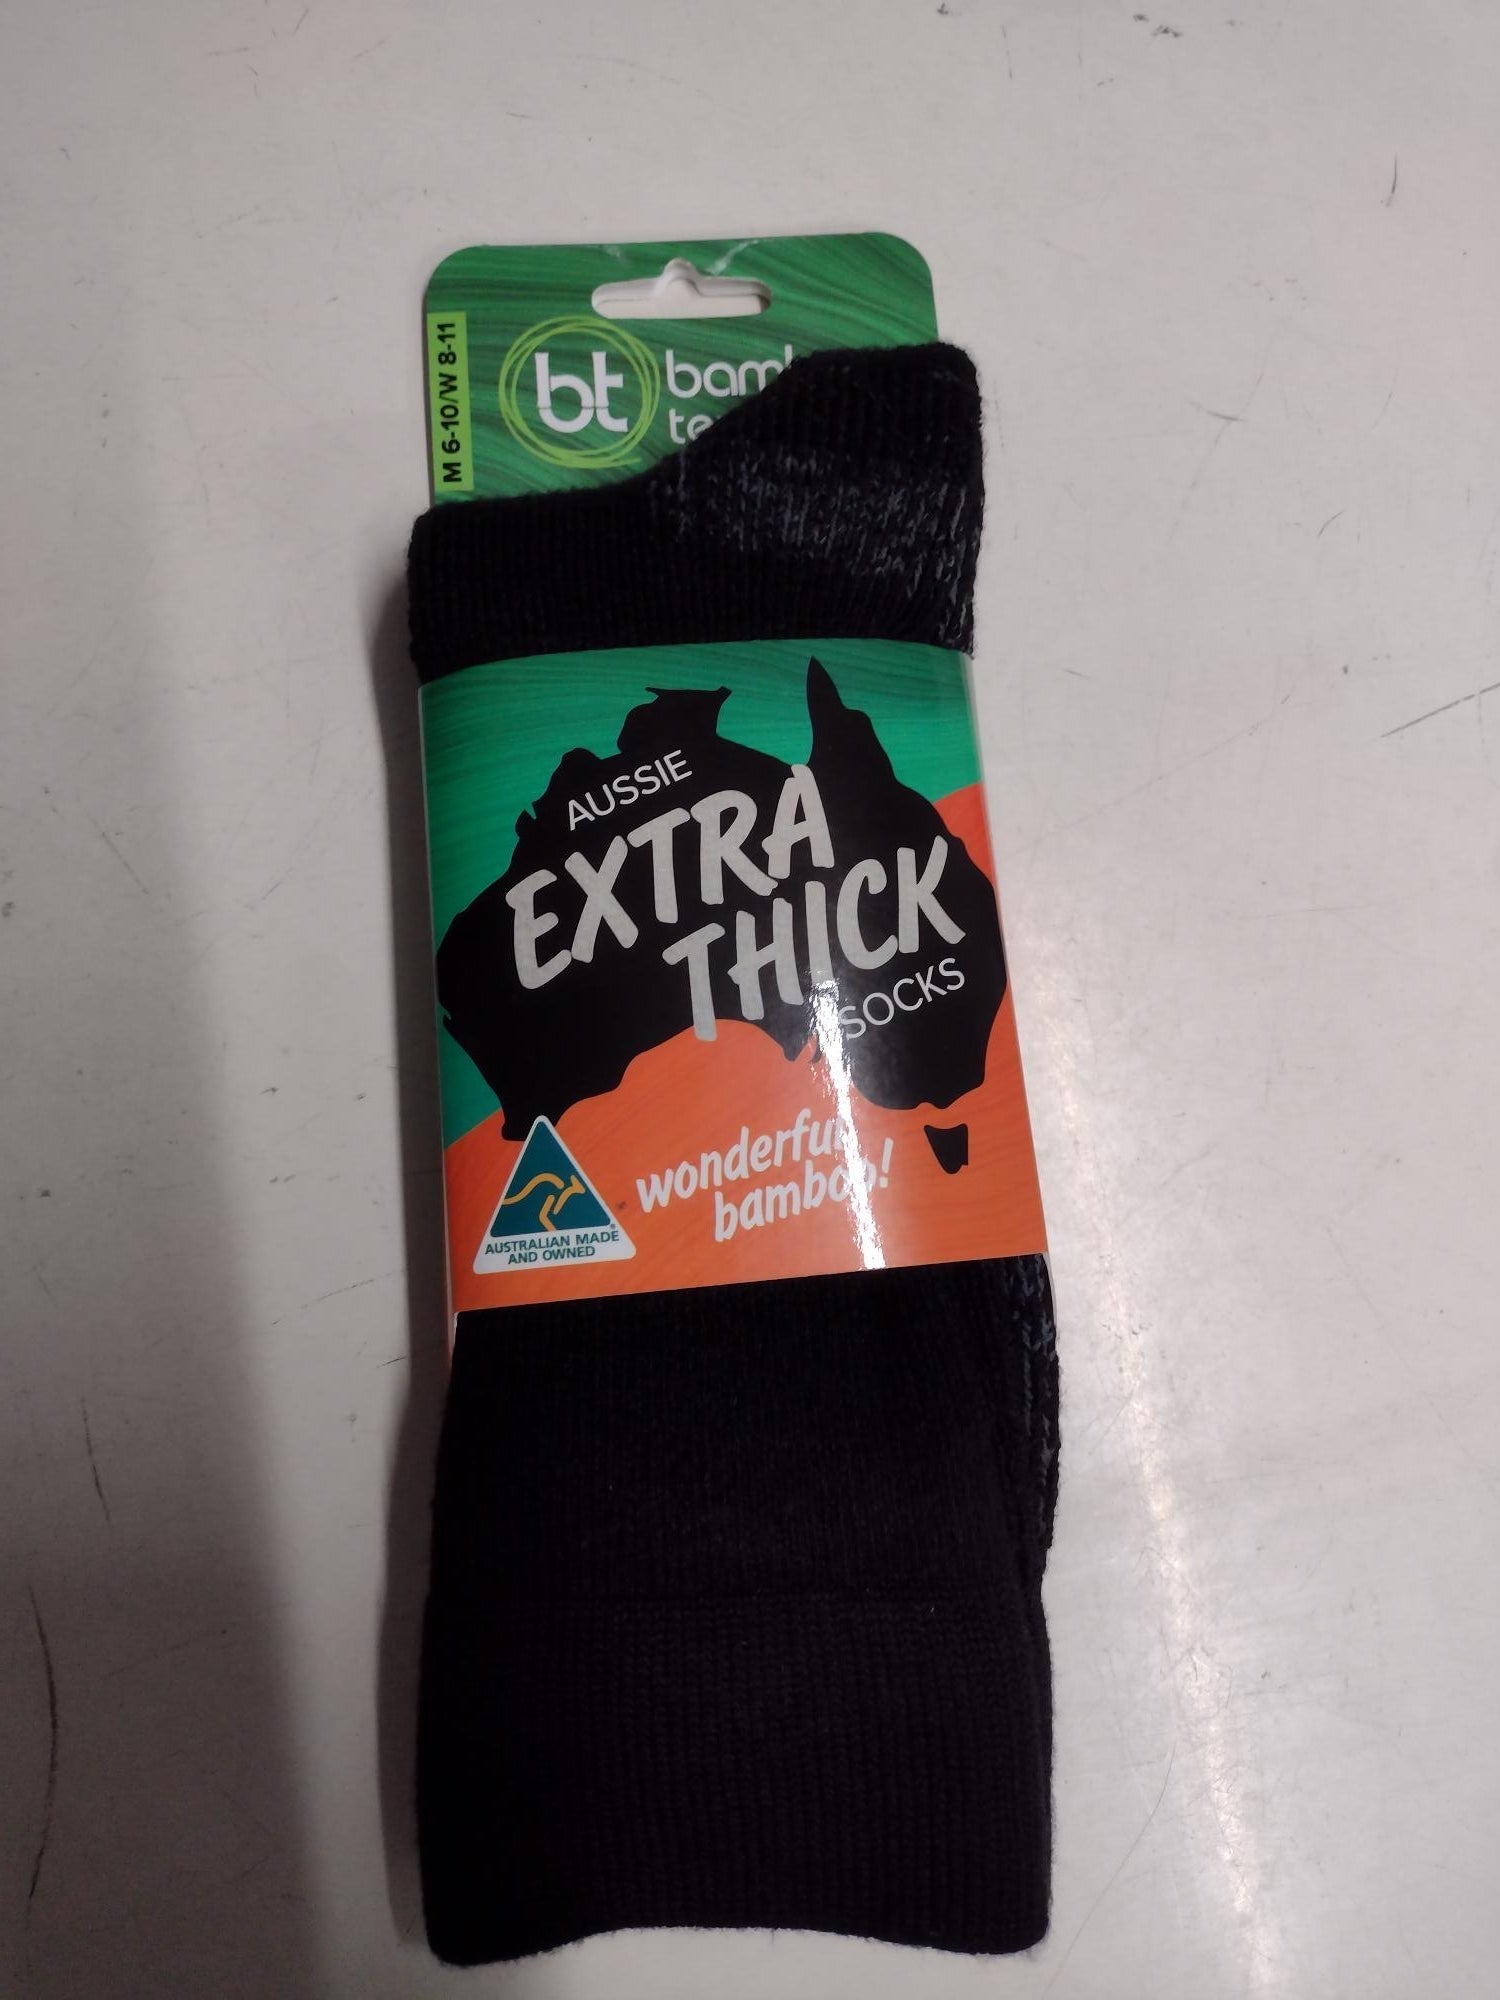 Extra Thick Bamboo Socks Australian Made 6T10 Black Menswear Mature Stock Service by Bamboo Textiles | The Bloke Shop